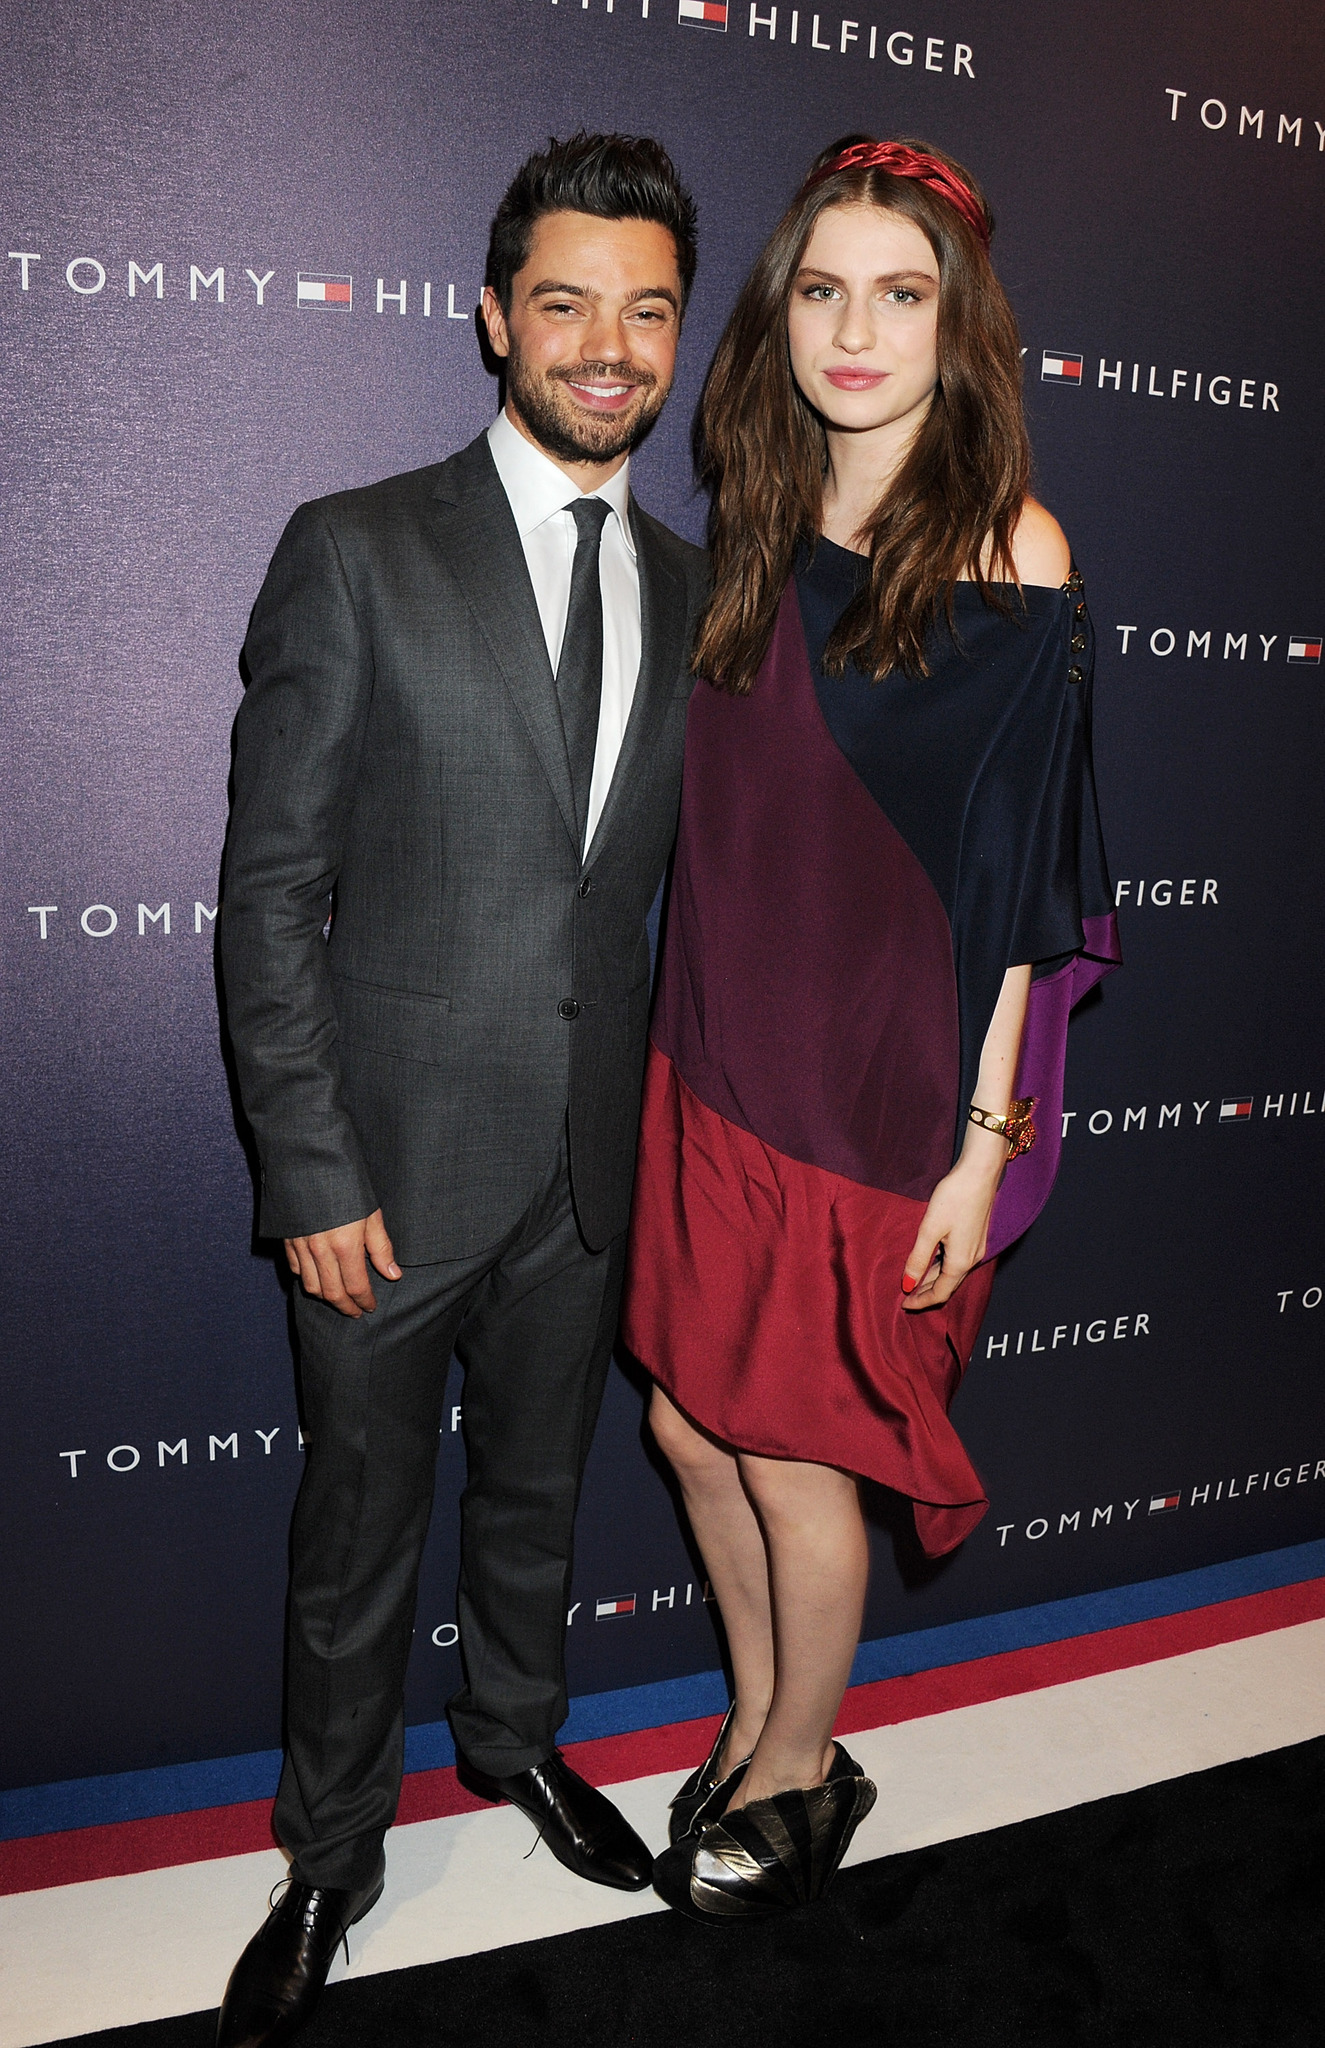 Natalie Lennox and Dominic Cooper